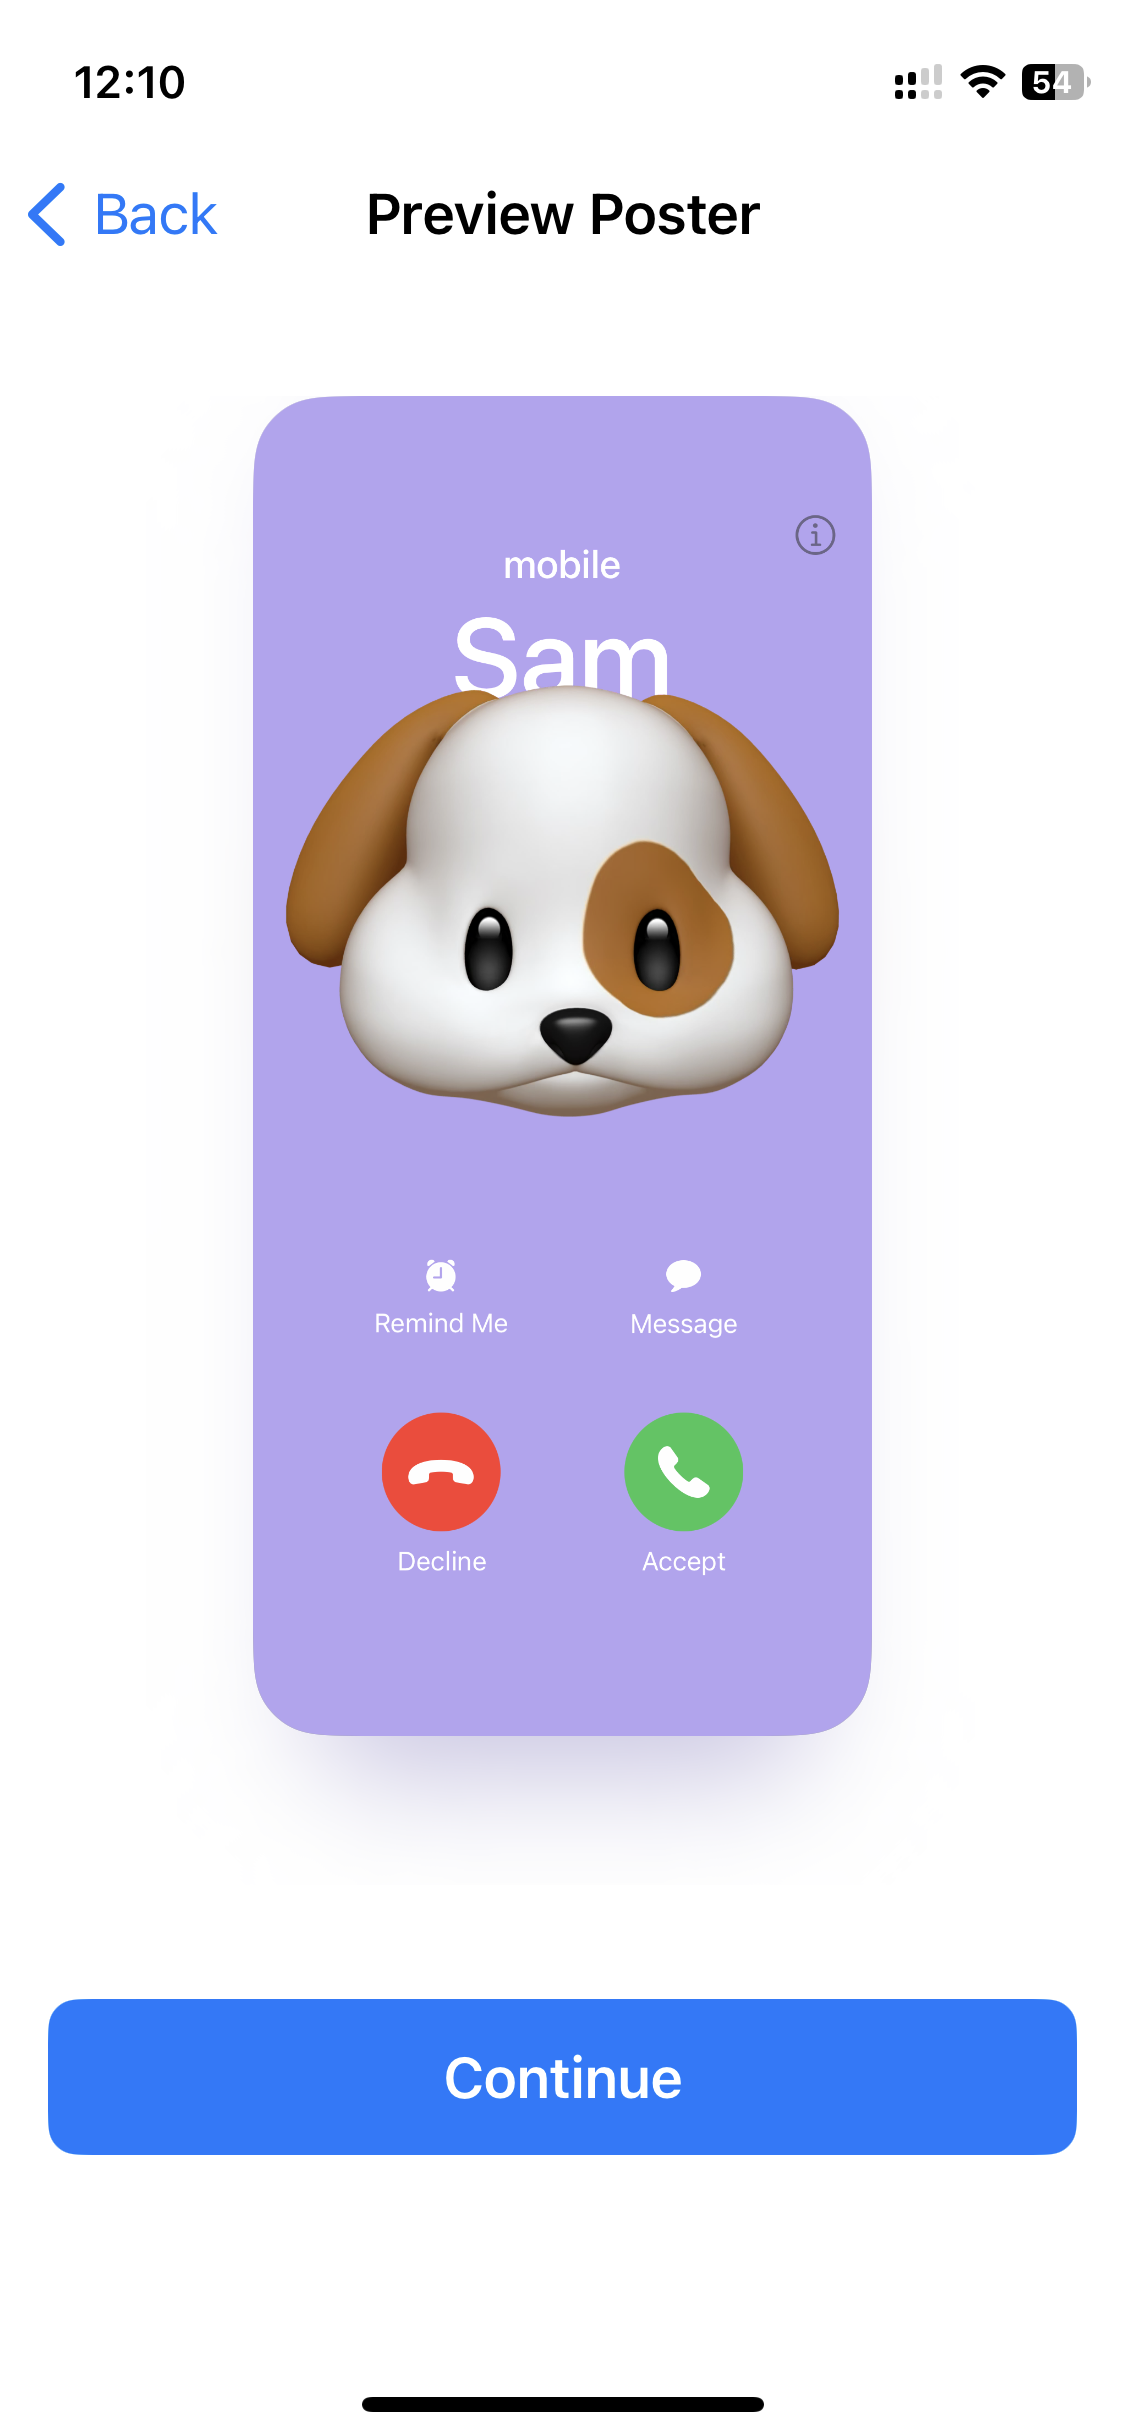 iOS 17 Contact Posters